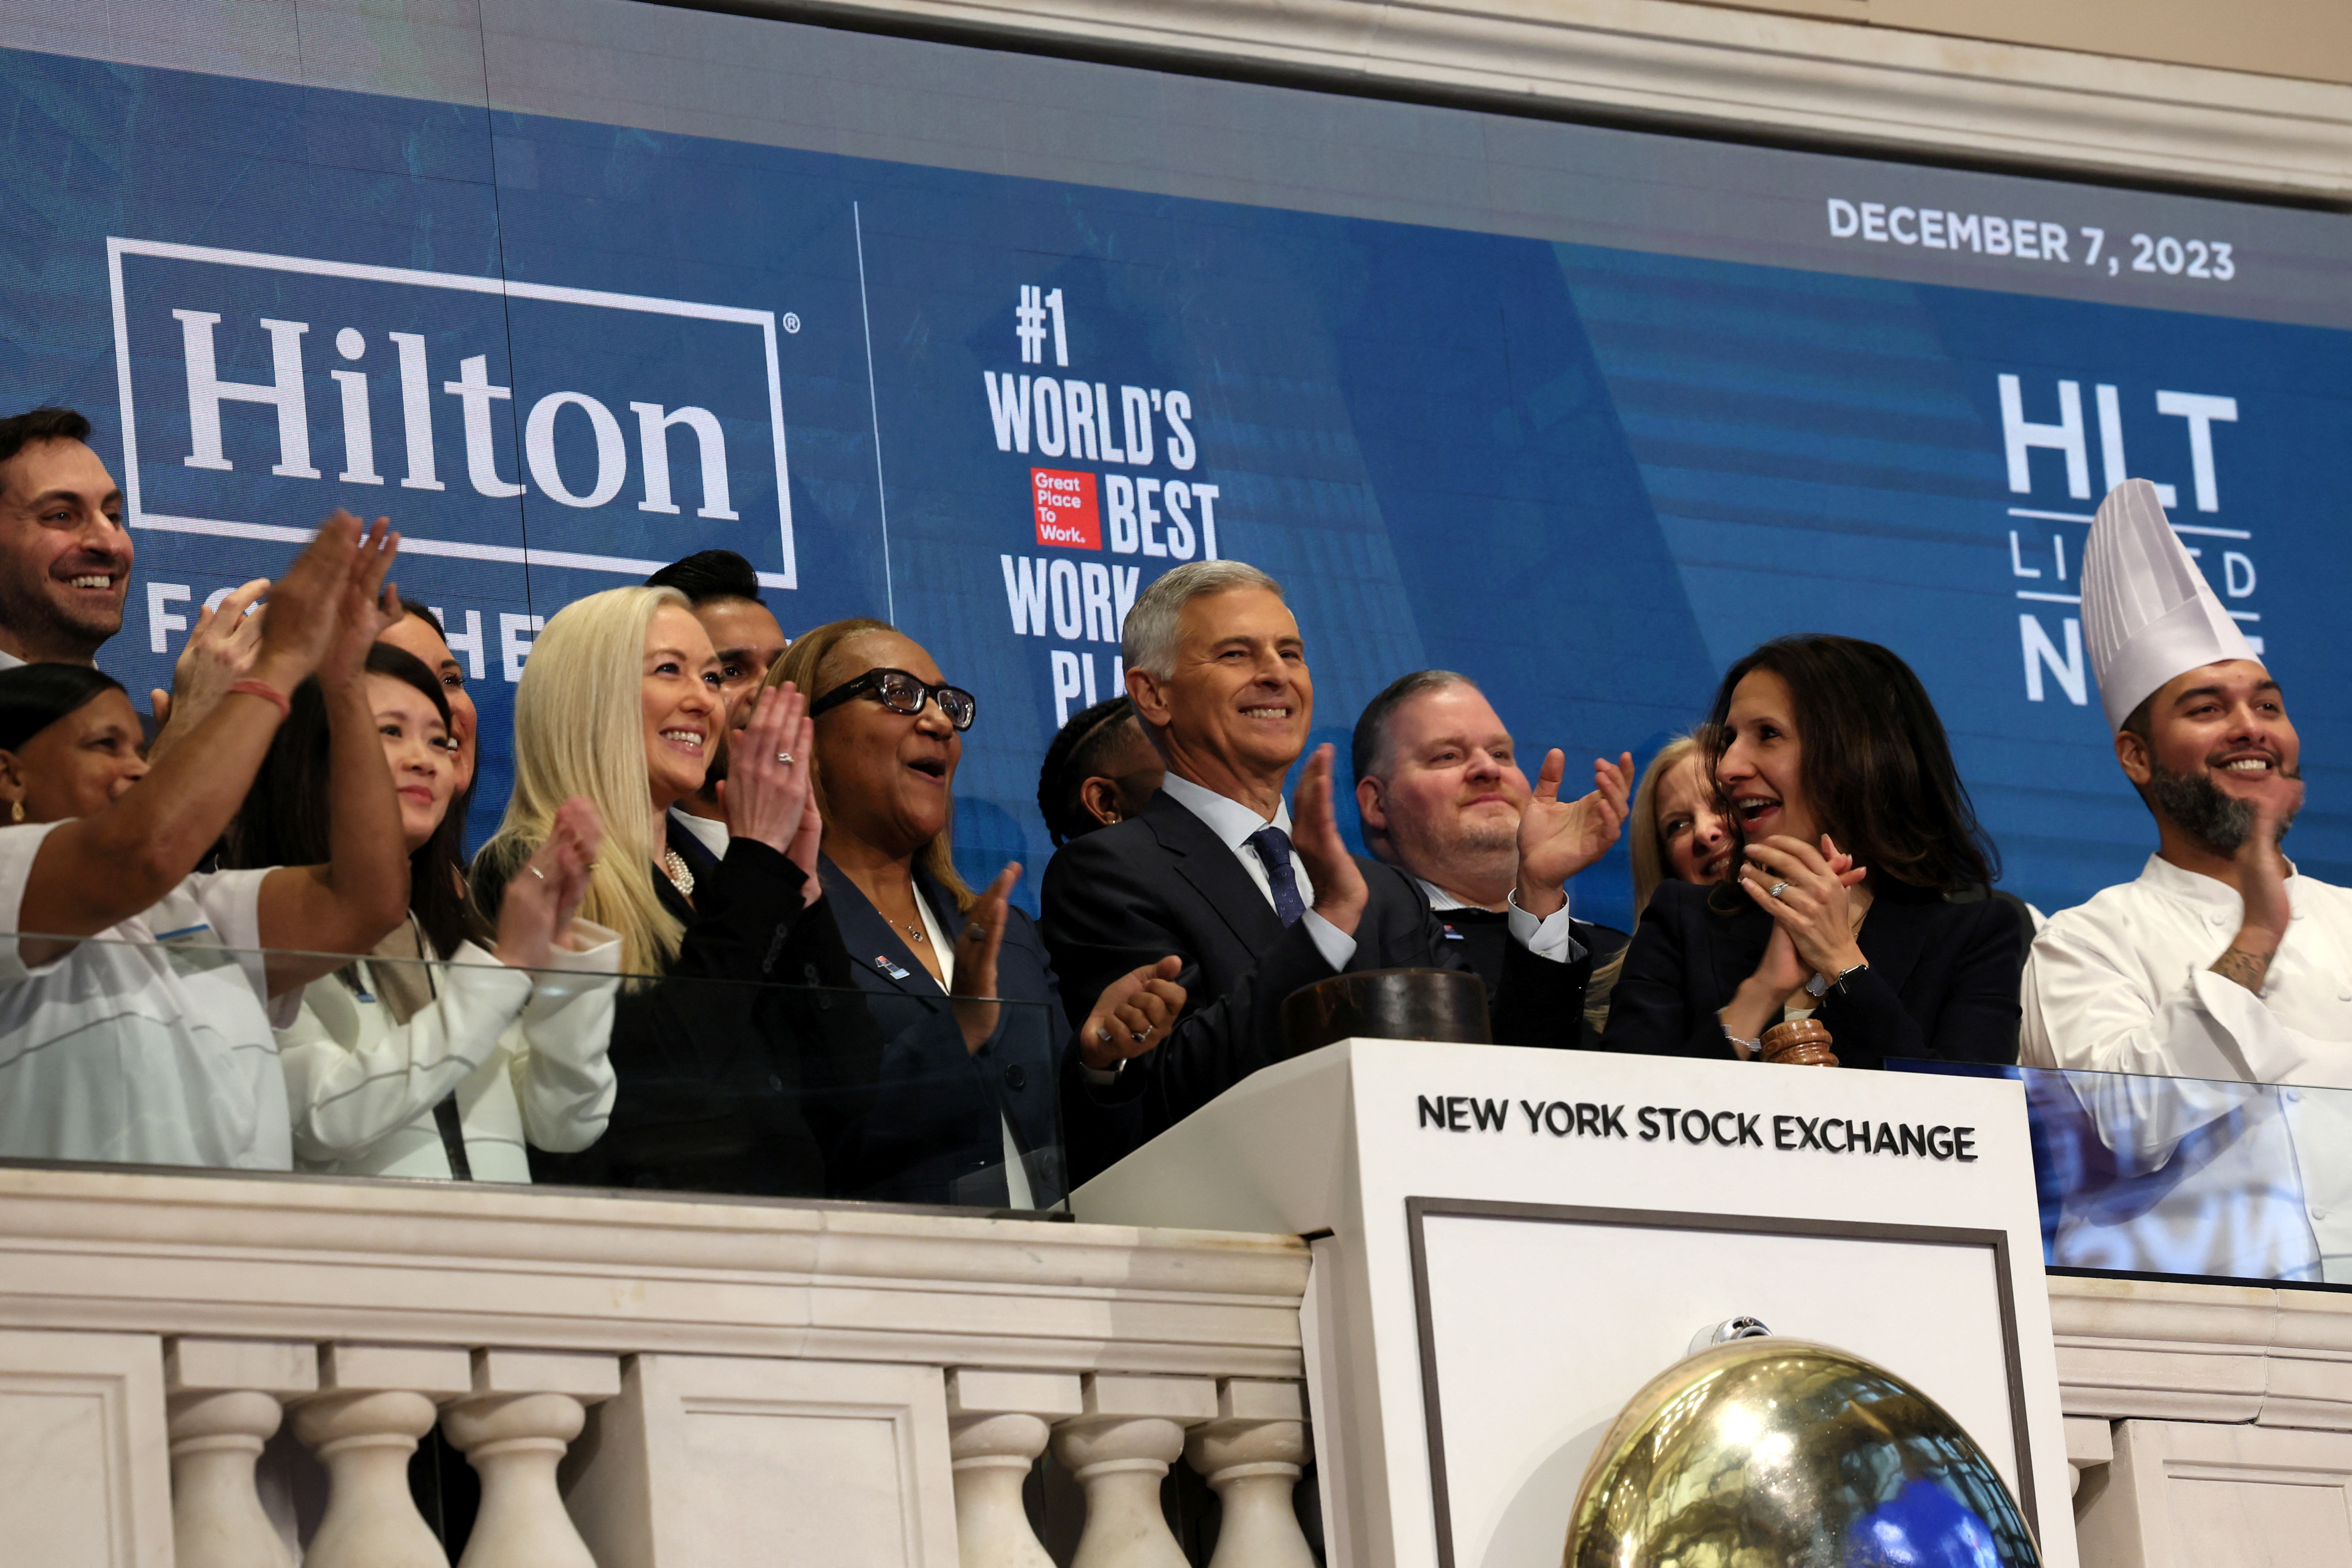 Christopher Nassetta, CEO of Hilton Worldwide, rings the opening bell at the NYSE in New York